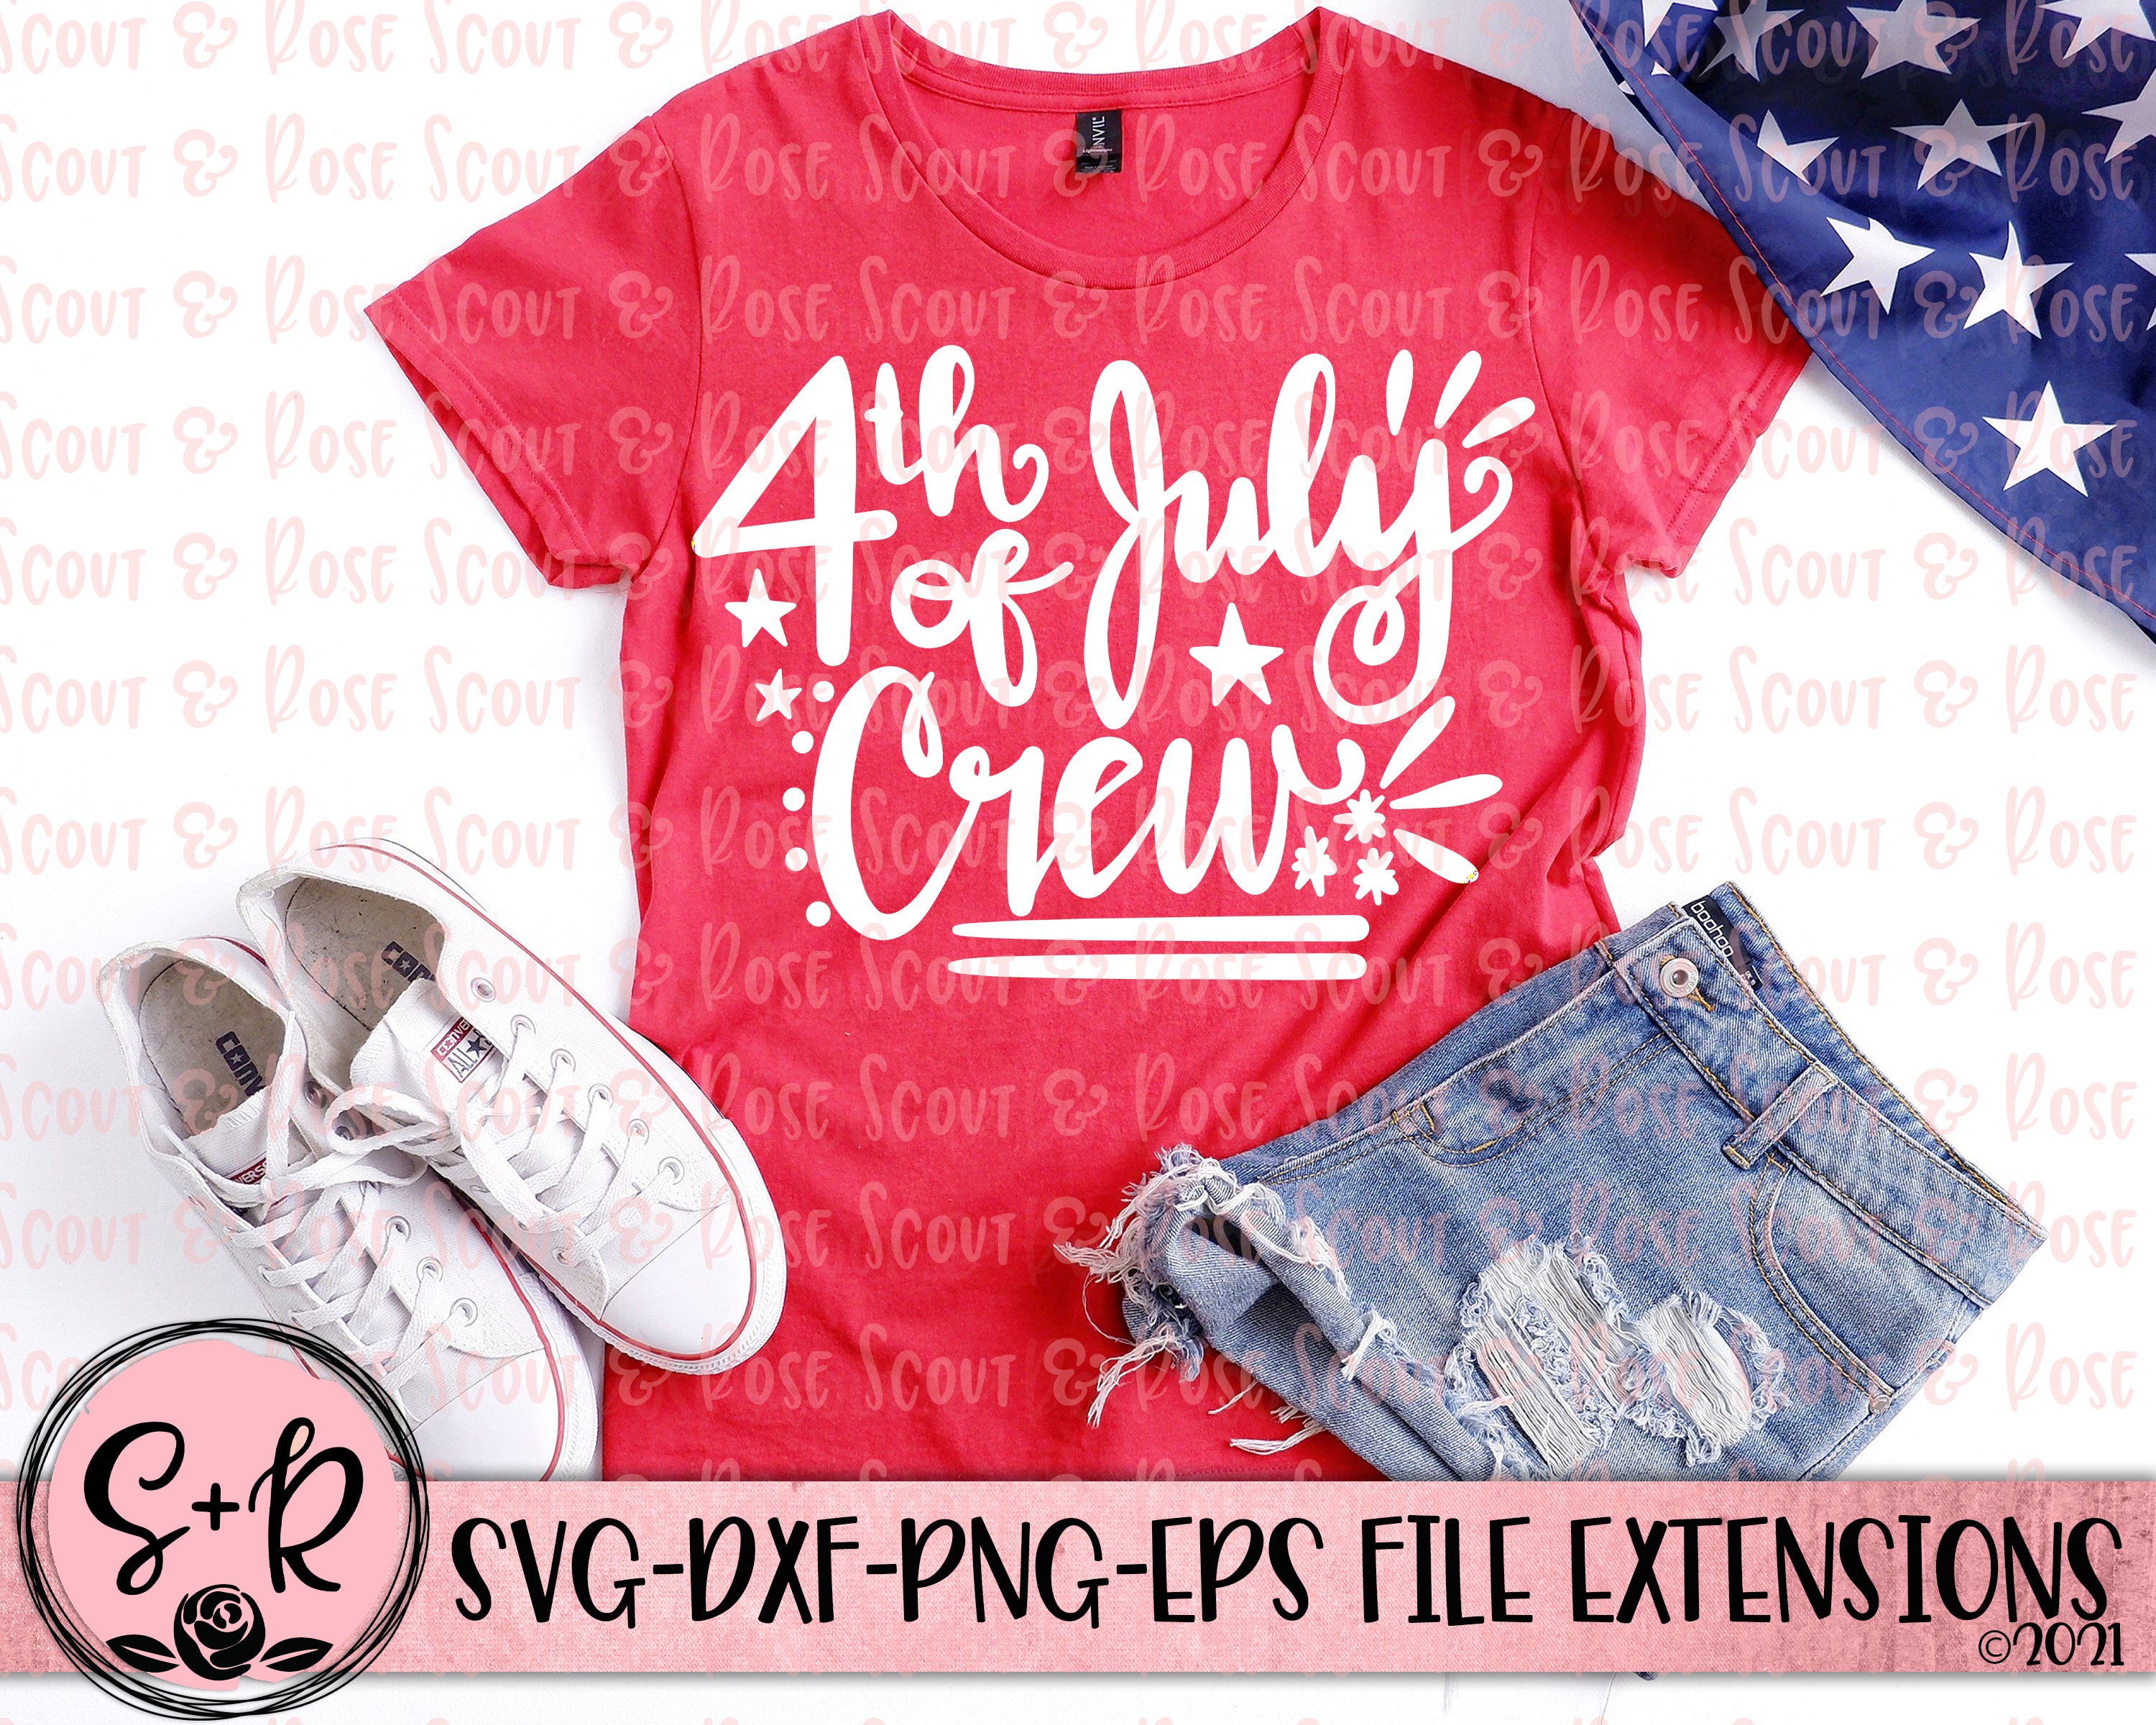 Download 4th Of July Crew Patriotic Svg Dxf Png Eps 2019 Scout And Rose Design Co